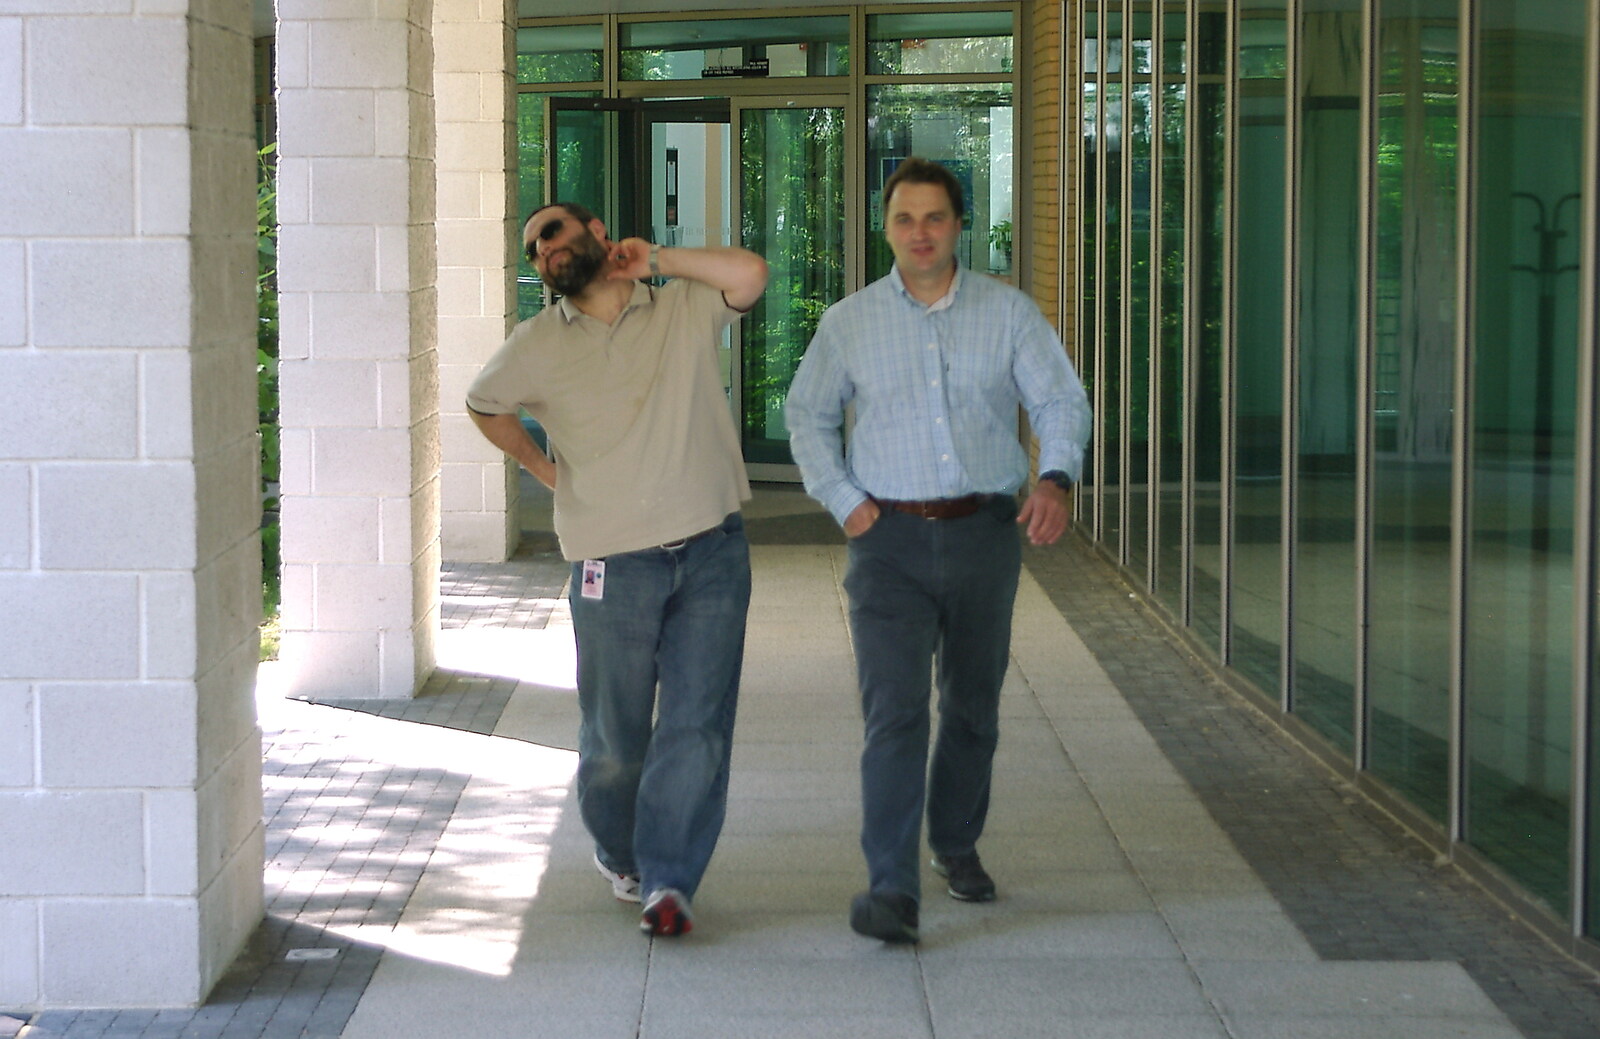 Craig and Stan have left the building from Steve Ives' Leaving Lunch, Science Park, Cambridge - 11th July 2005